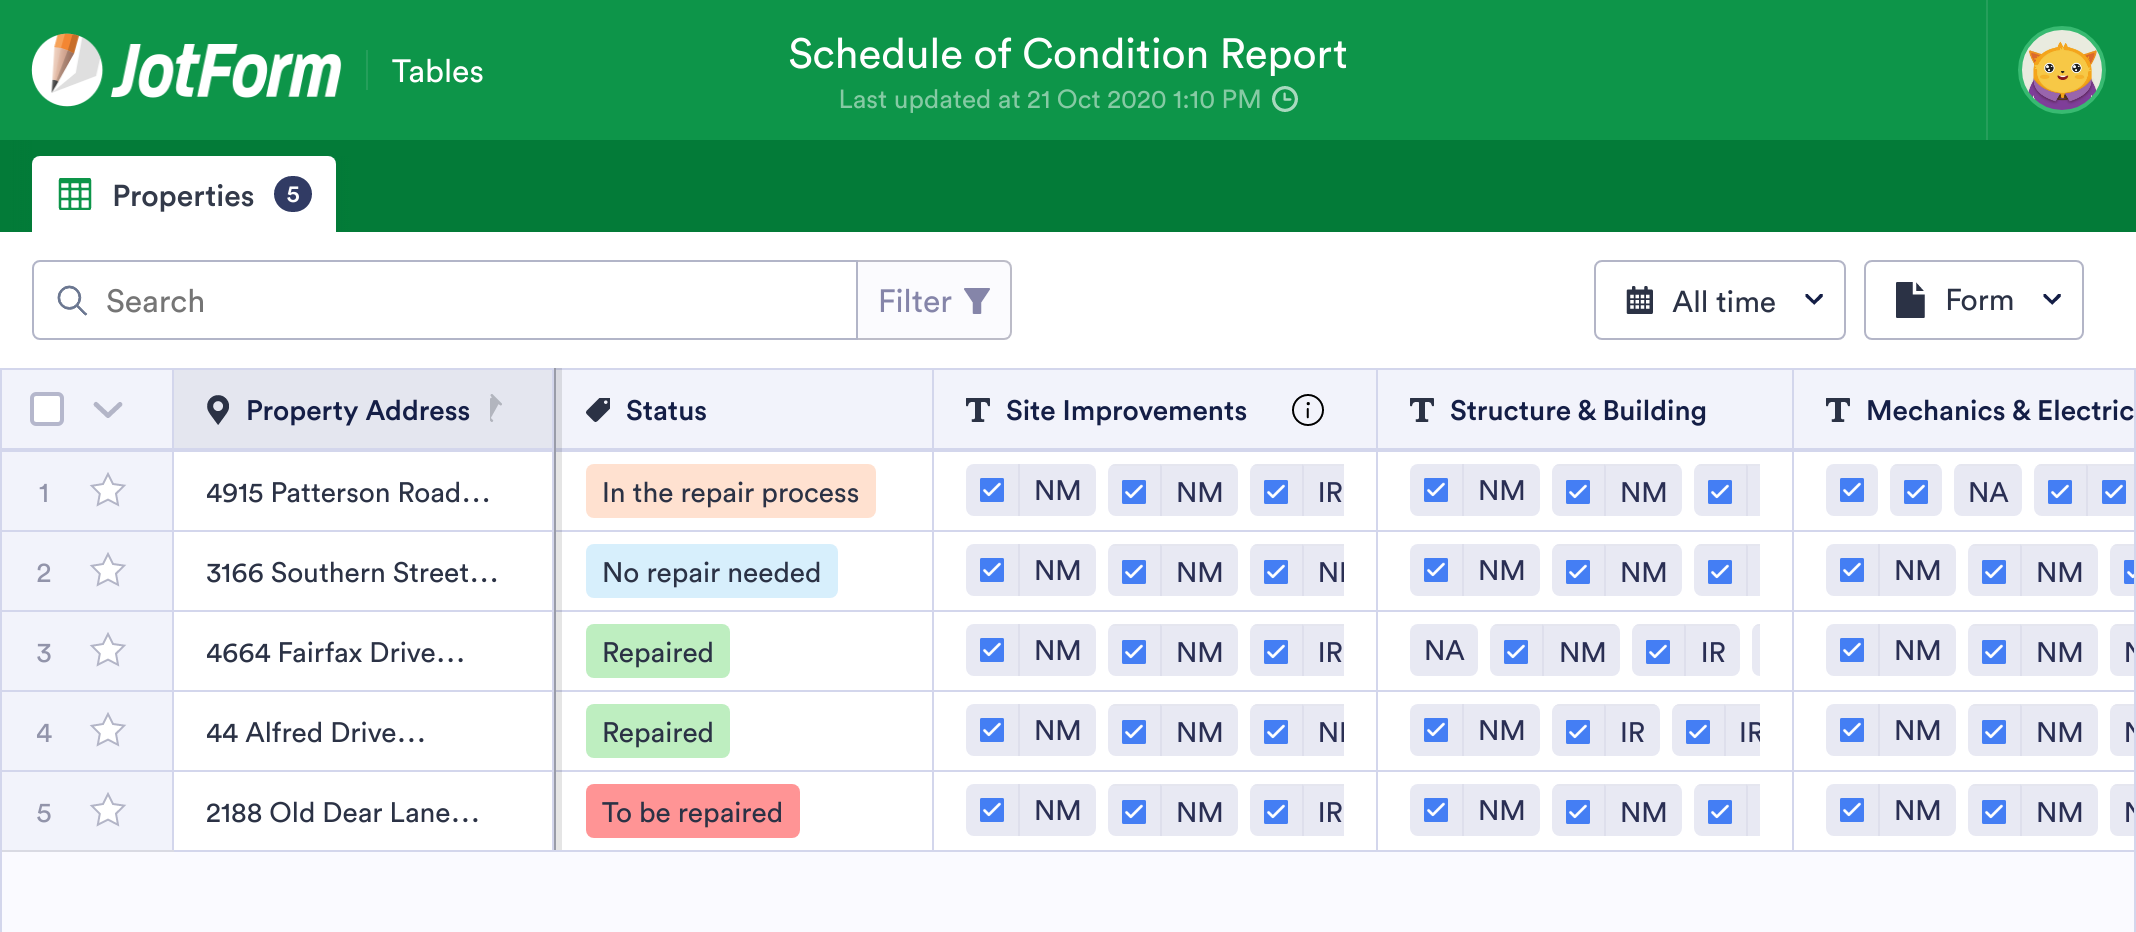 Schedule of Condition Report Template | JotForm Tables